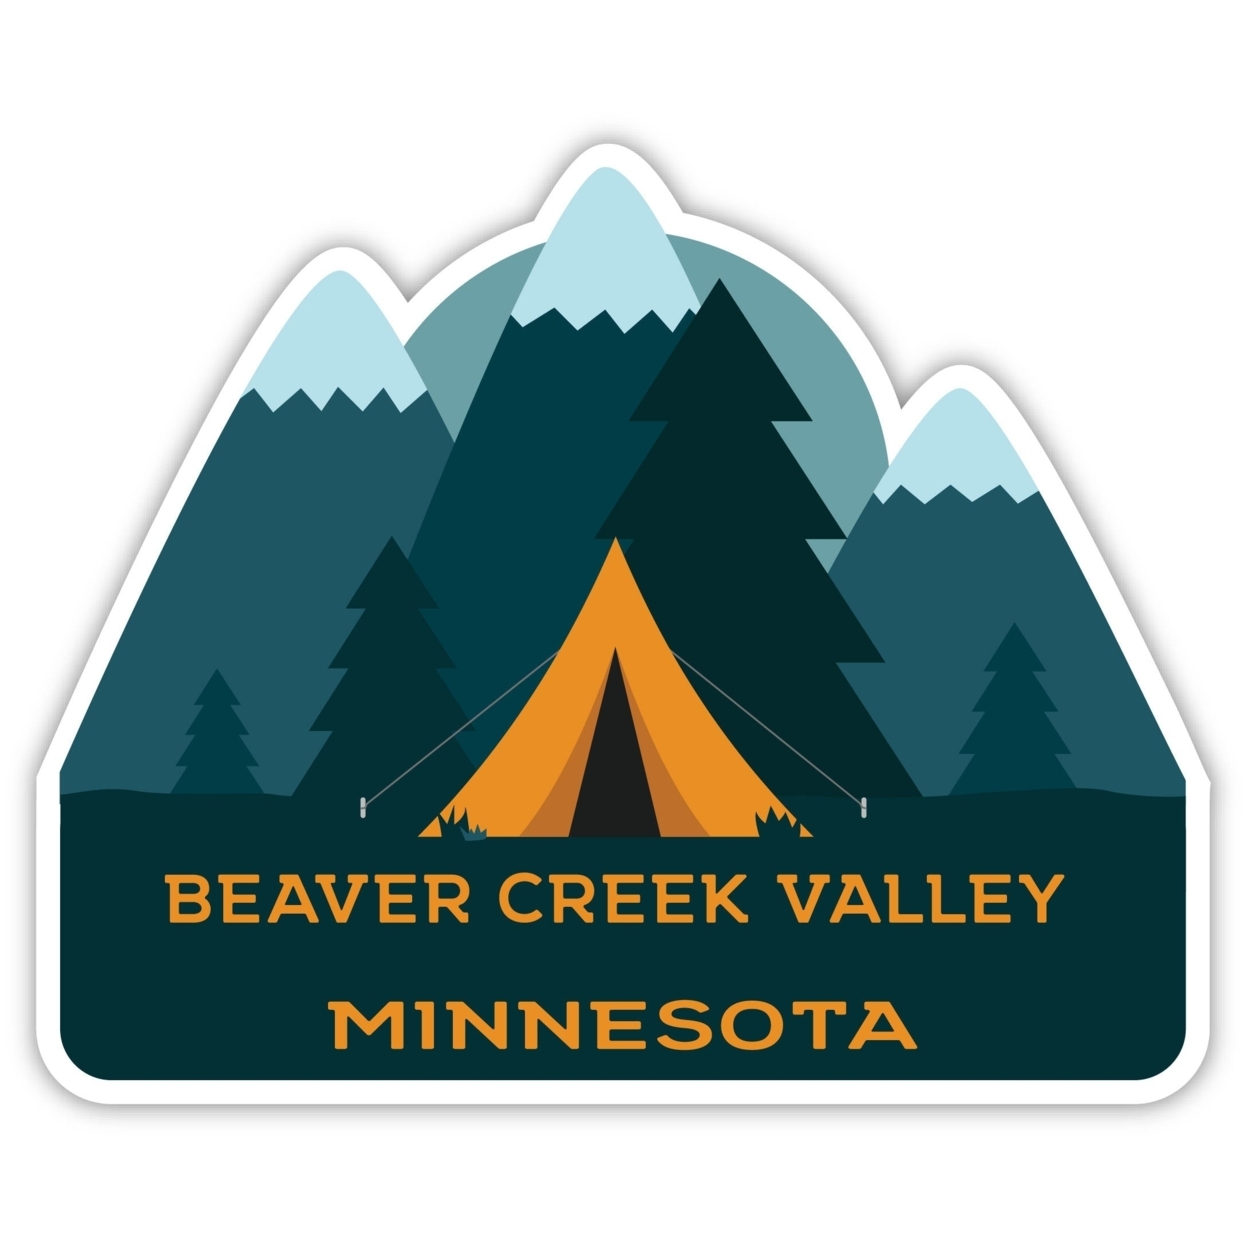 Beaver Creek Valley Minnesota Souvenir Decorative Stickers (Choose Theme And Size) - 4-Pack, 4-Inch, Tent